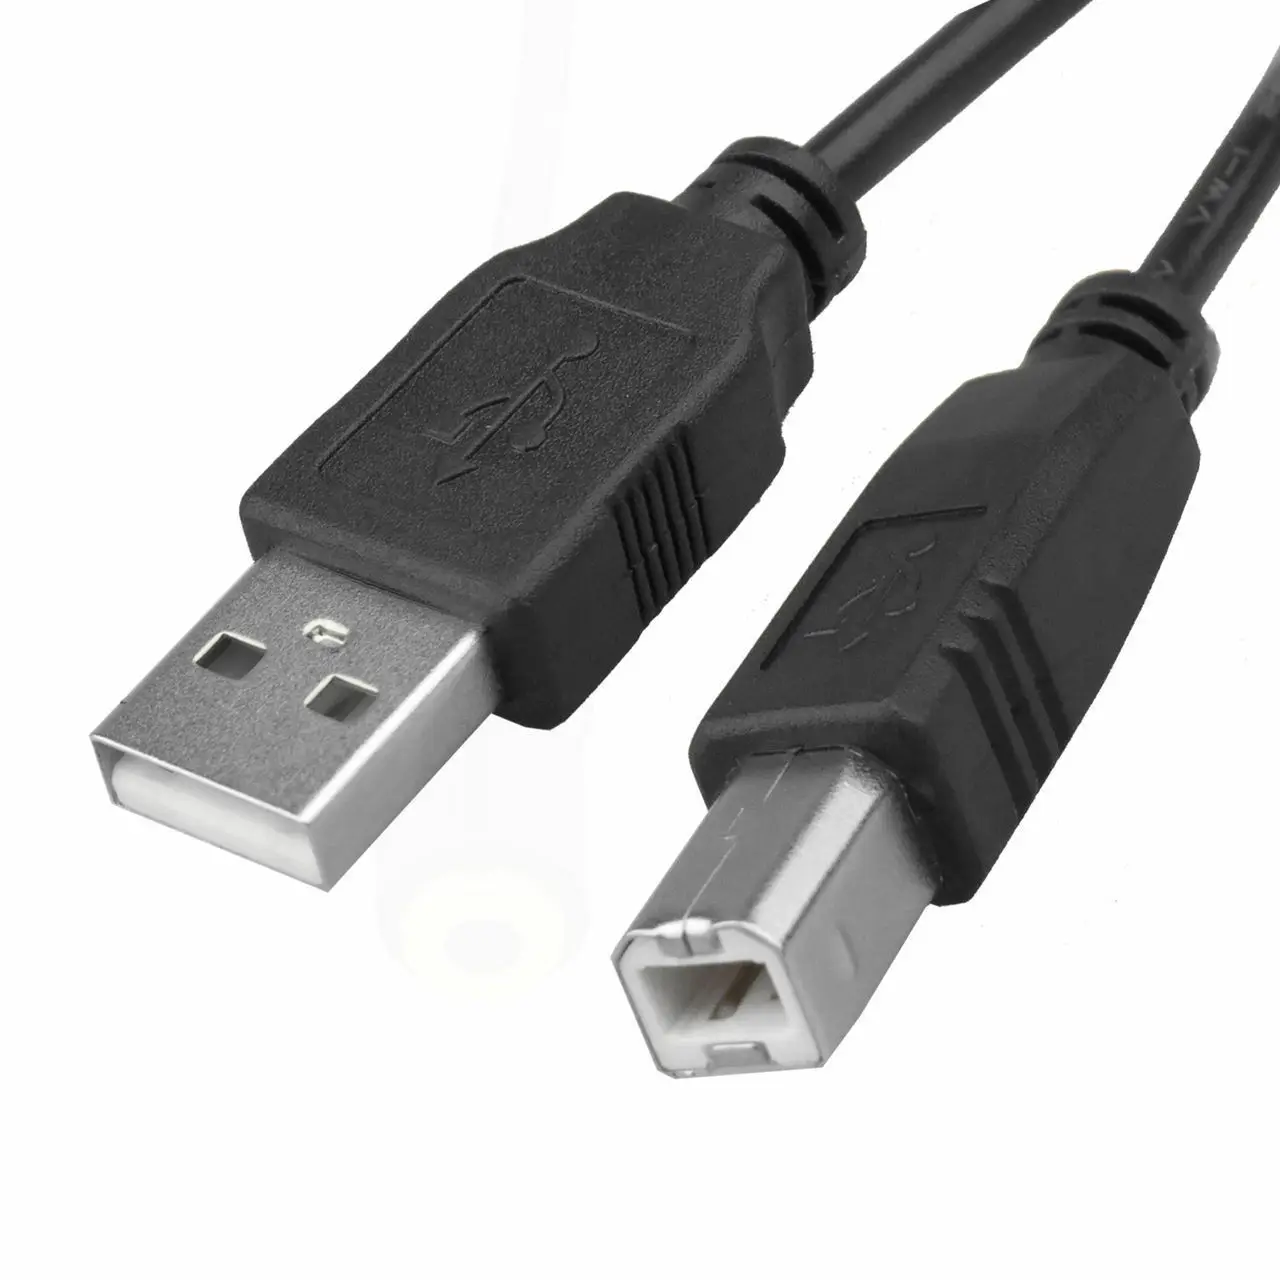 A-Male to B-Male for AKiTioThunder Dock Huetron TM USB 2.0 Cable - 3 FT/10 PACK/BLACK Specific Models Only